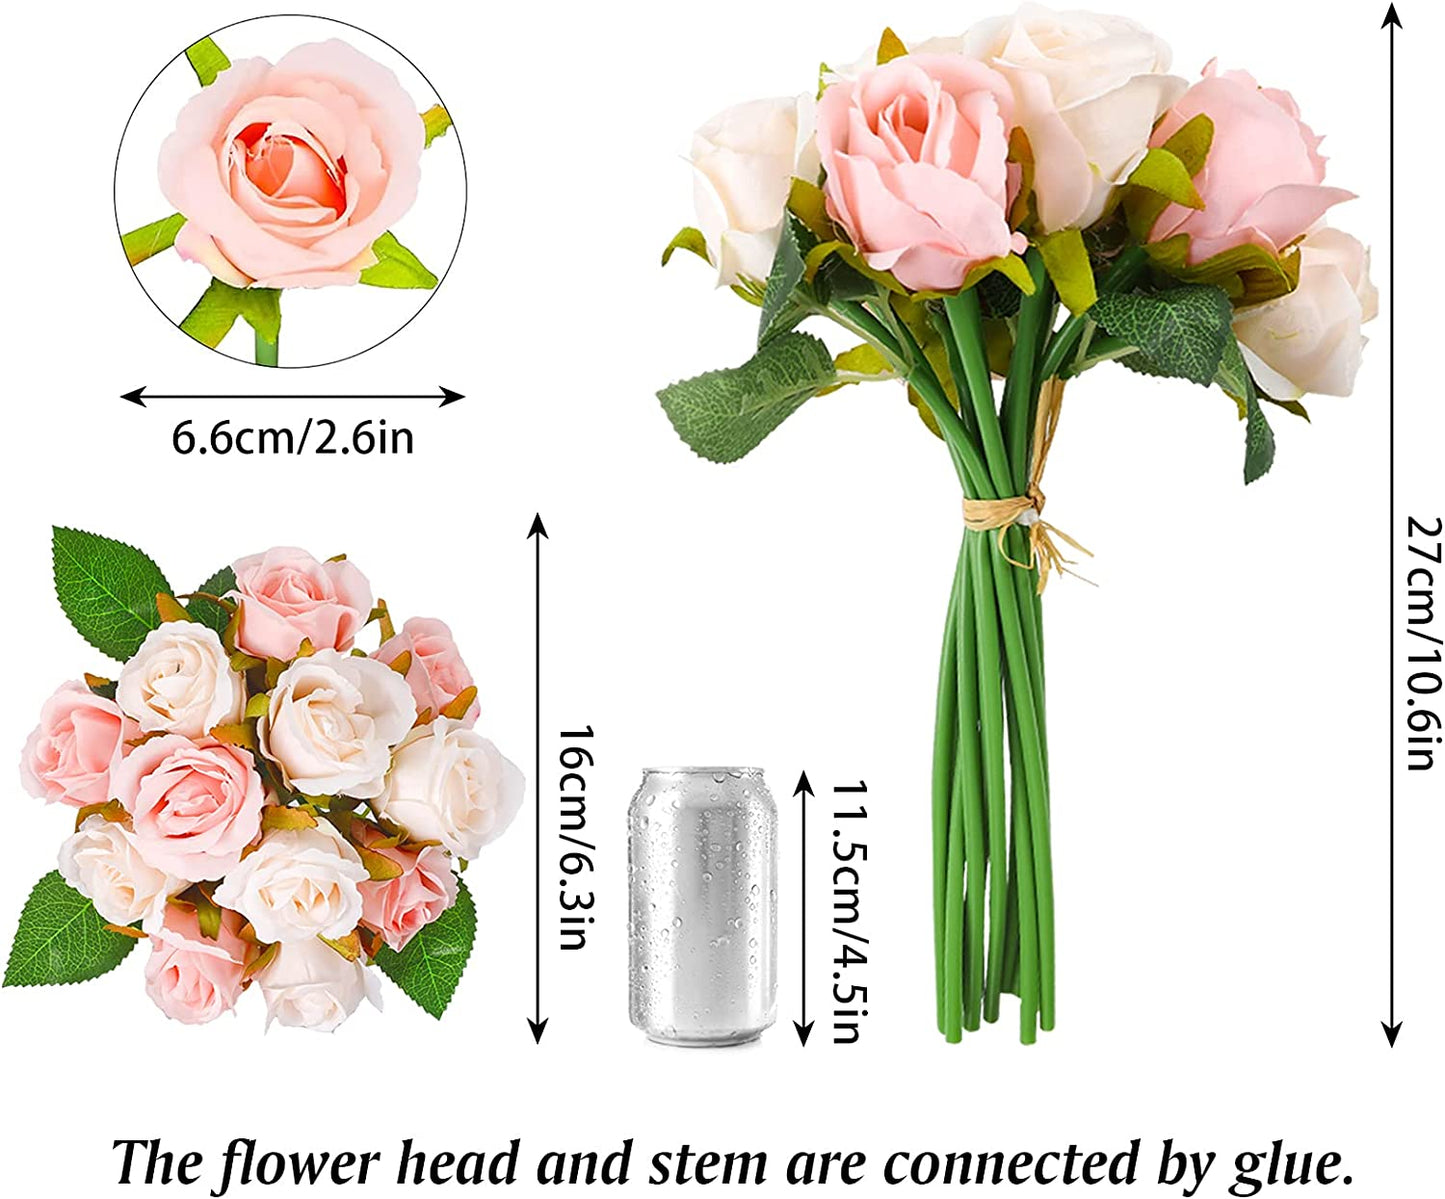 HomeXO 12 Pcs Rose Flowers Artificial Faux Silk Roses Height 10.6" Pink Cream White Color ,12 pcs  Leaves and Stems Real Looking Roses for Vases DIY Bouquets  (Pink,Cream White)